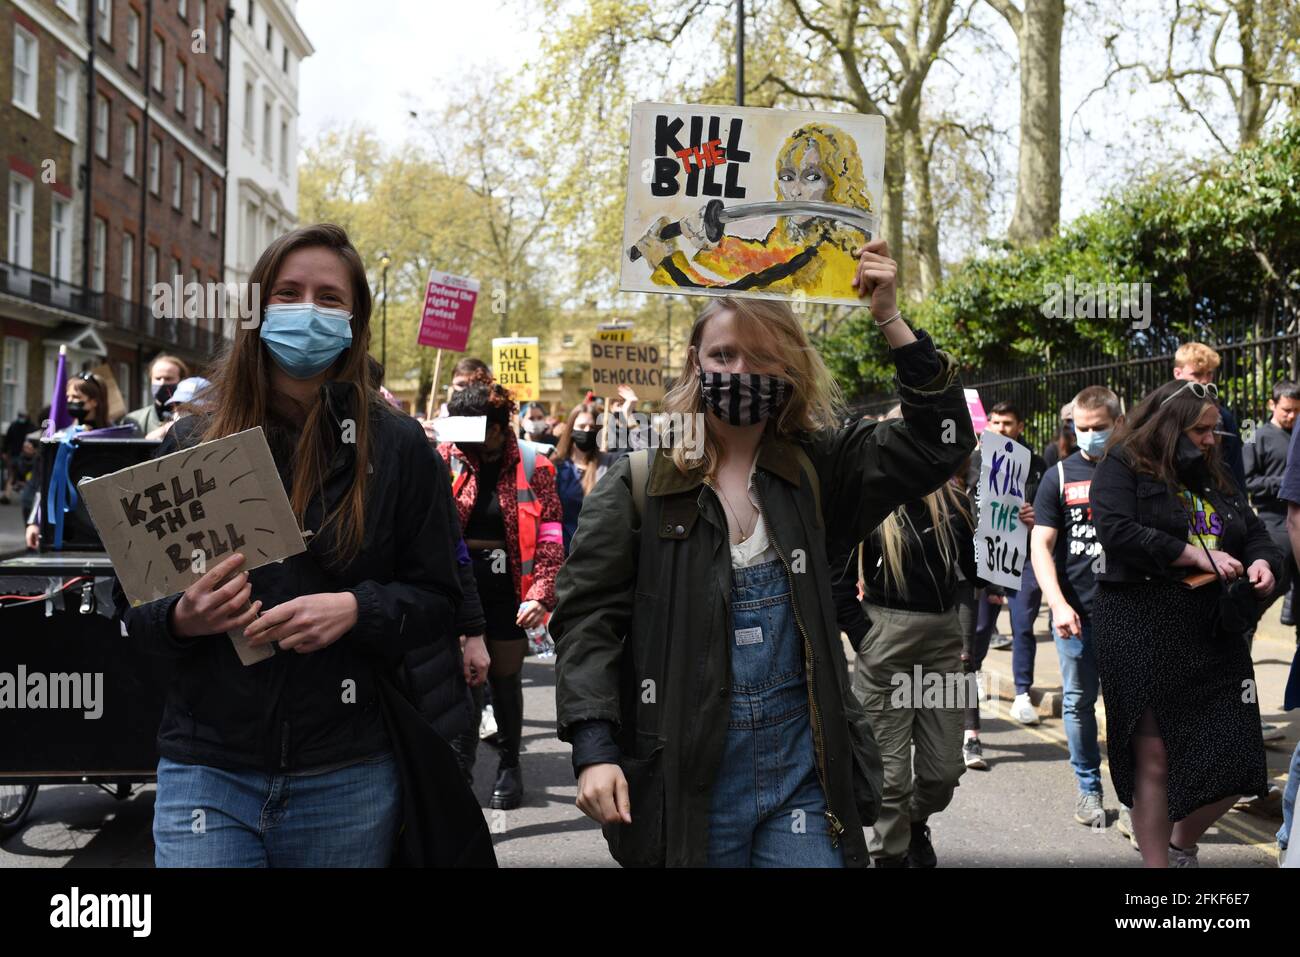 London, UK. 1 May 2021. Extinction Rebellion, Black Lives Matter, Antifa, Anarchists and many other groups gathered in London for 'Kill The Bill' protest against the government's proposed Police, Crime, Sentencing and Courts Bill. Credit: Andrea Domeniconi/Alamy Live News Stock Photo